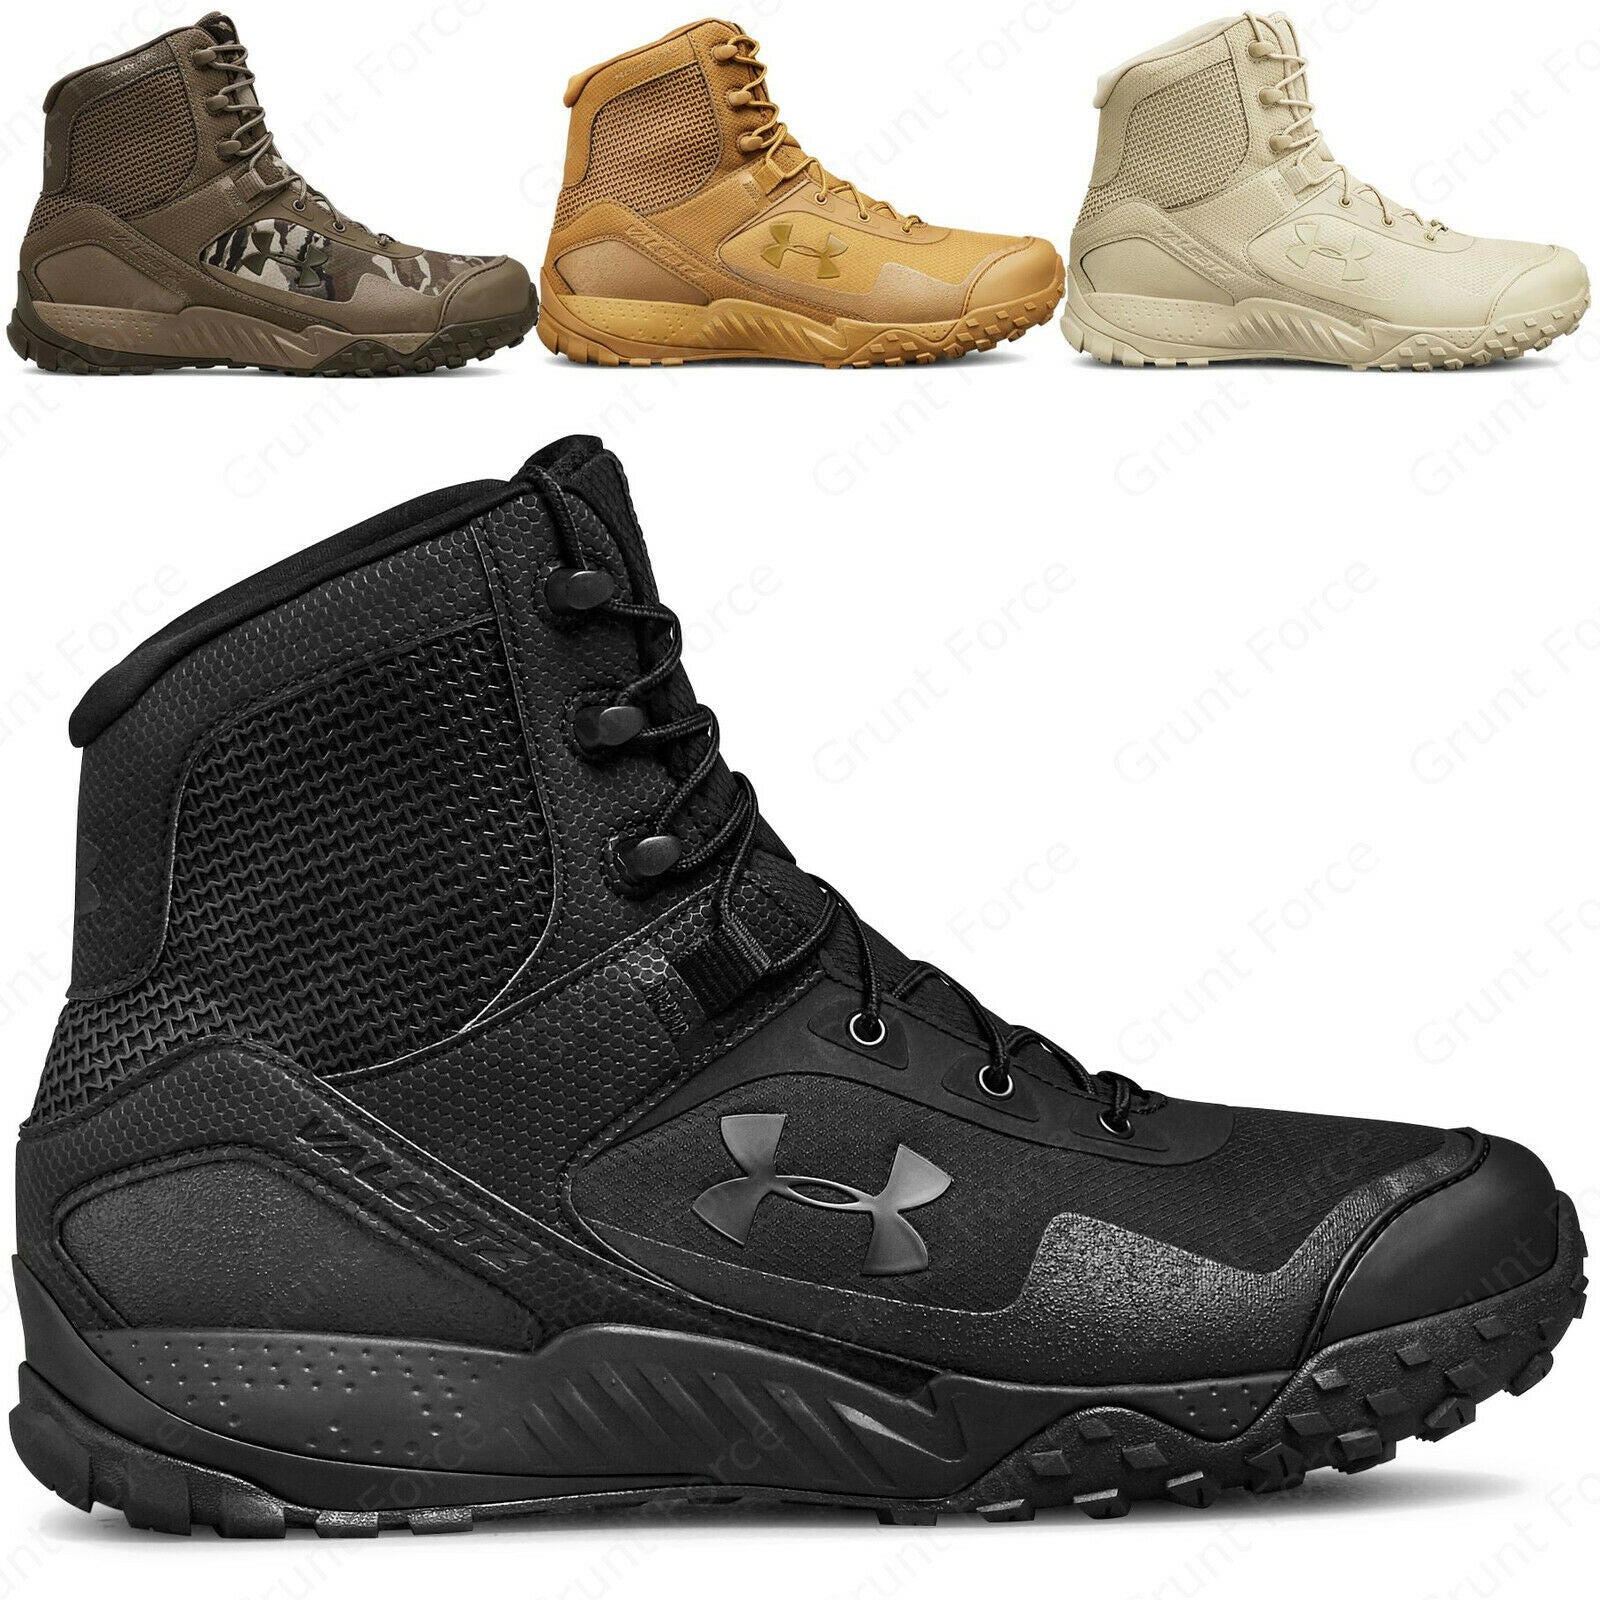 Men's ankle hiking boots UNDER ARMOUR-Micro G Valsetz Mid  coyote/coyote/coyote